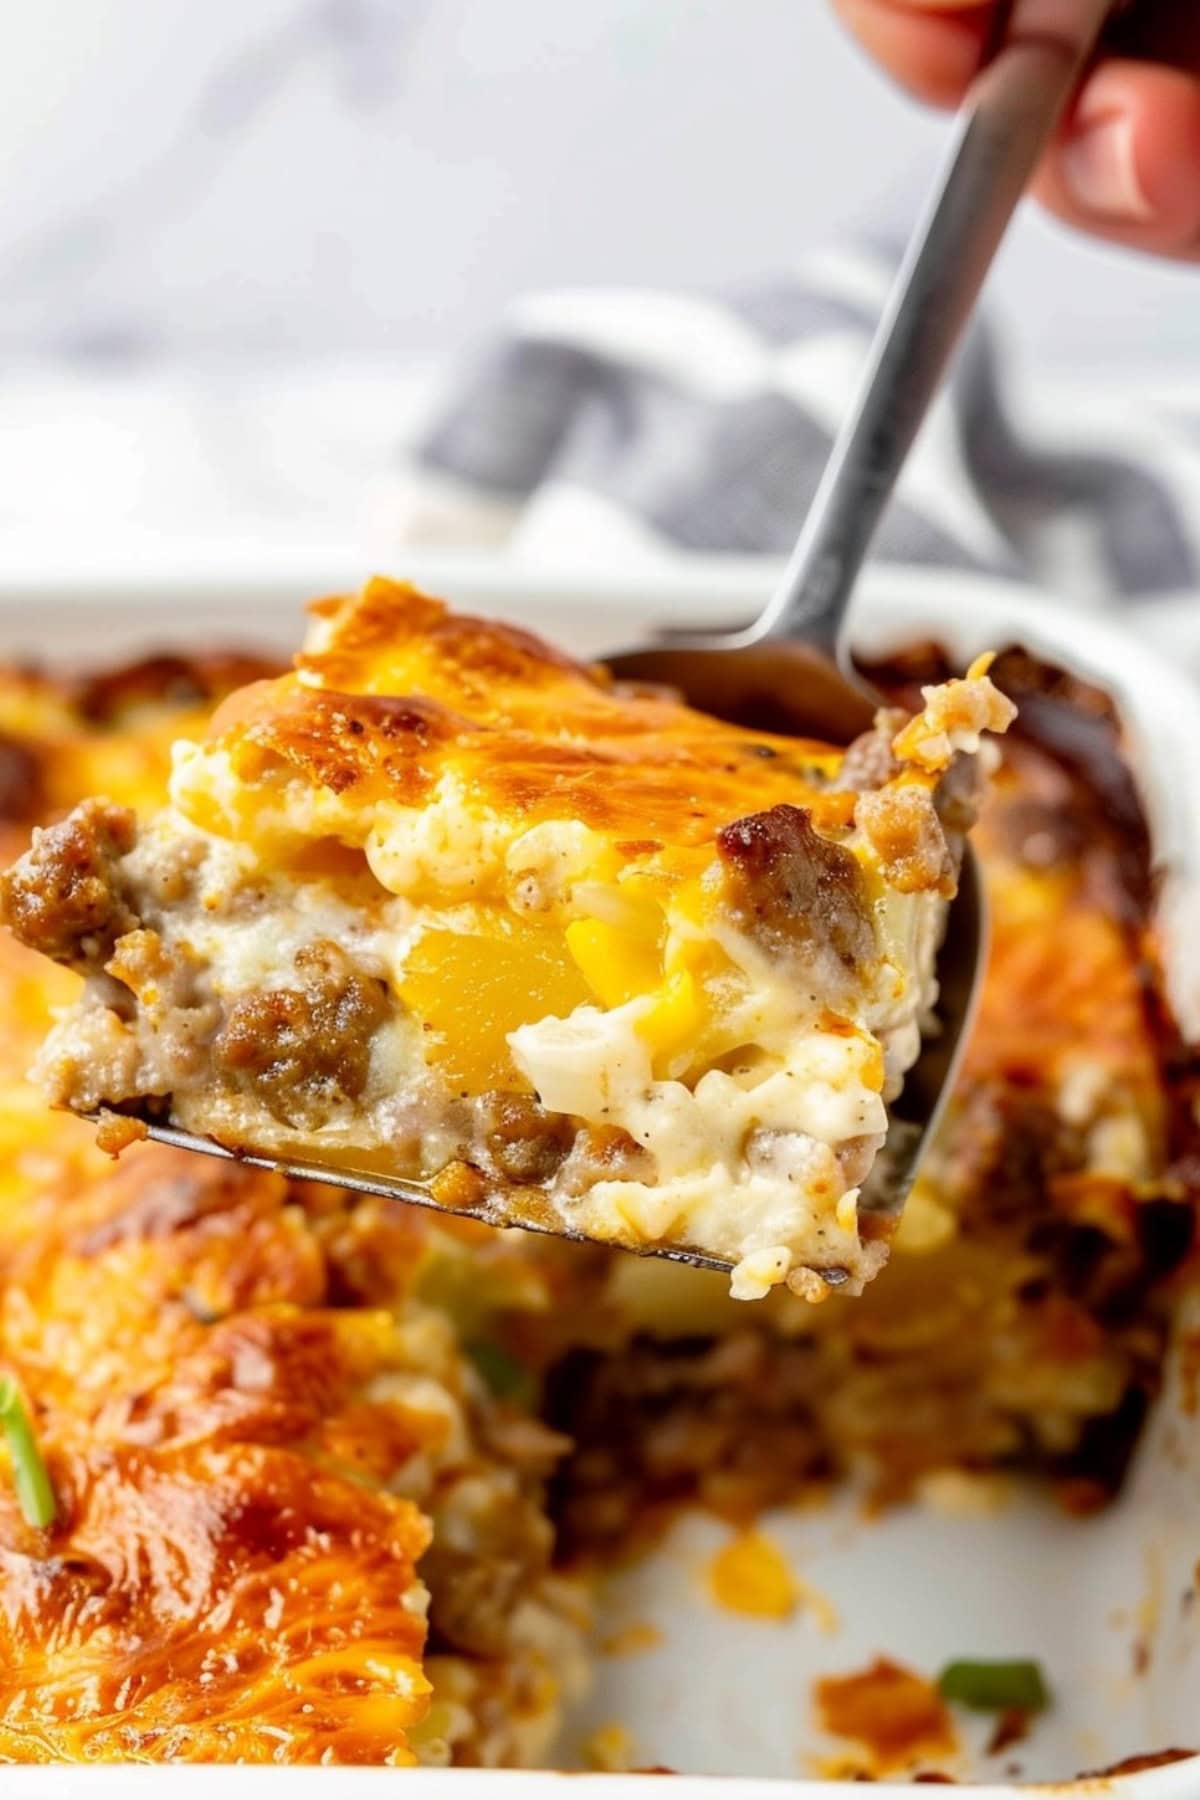 Slice of Sausage hashbrown breakfast casserole in lifted by pie ladle.